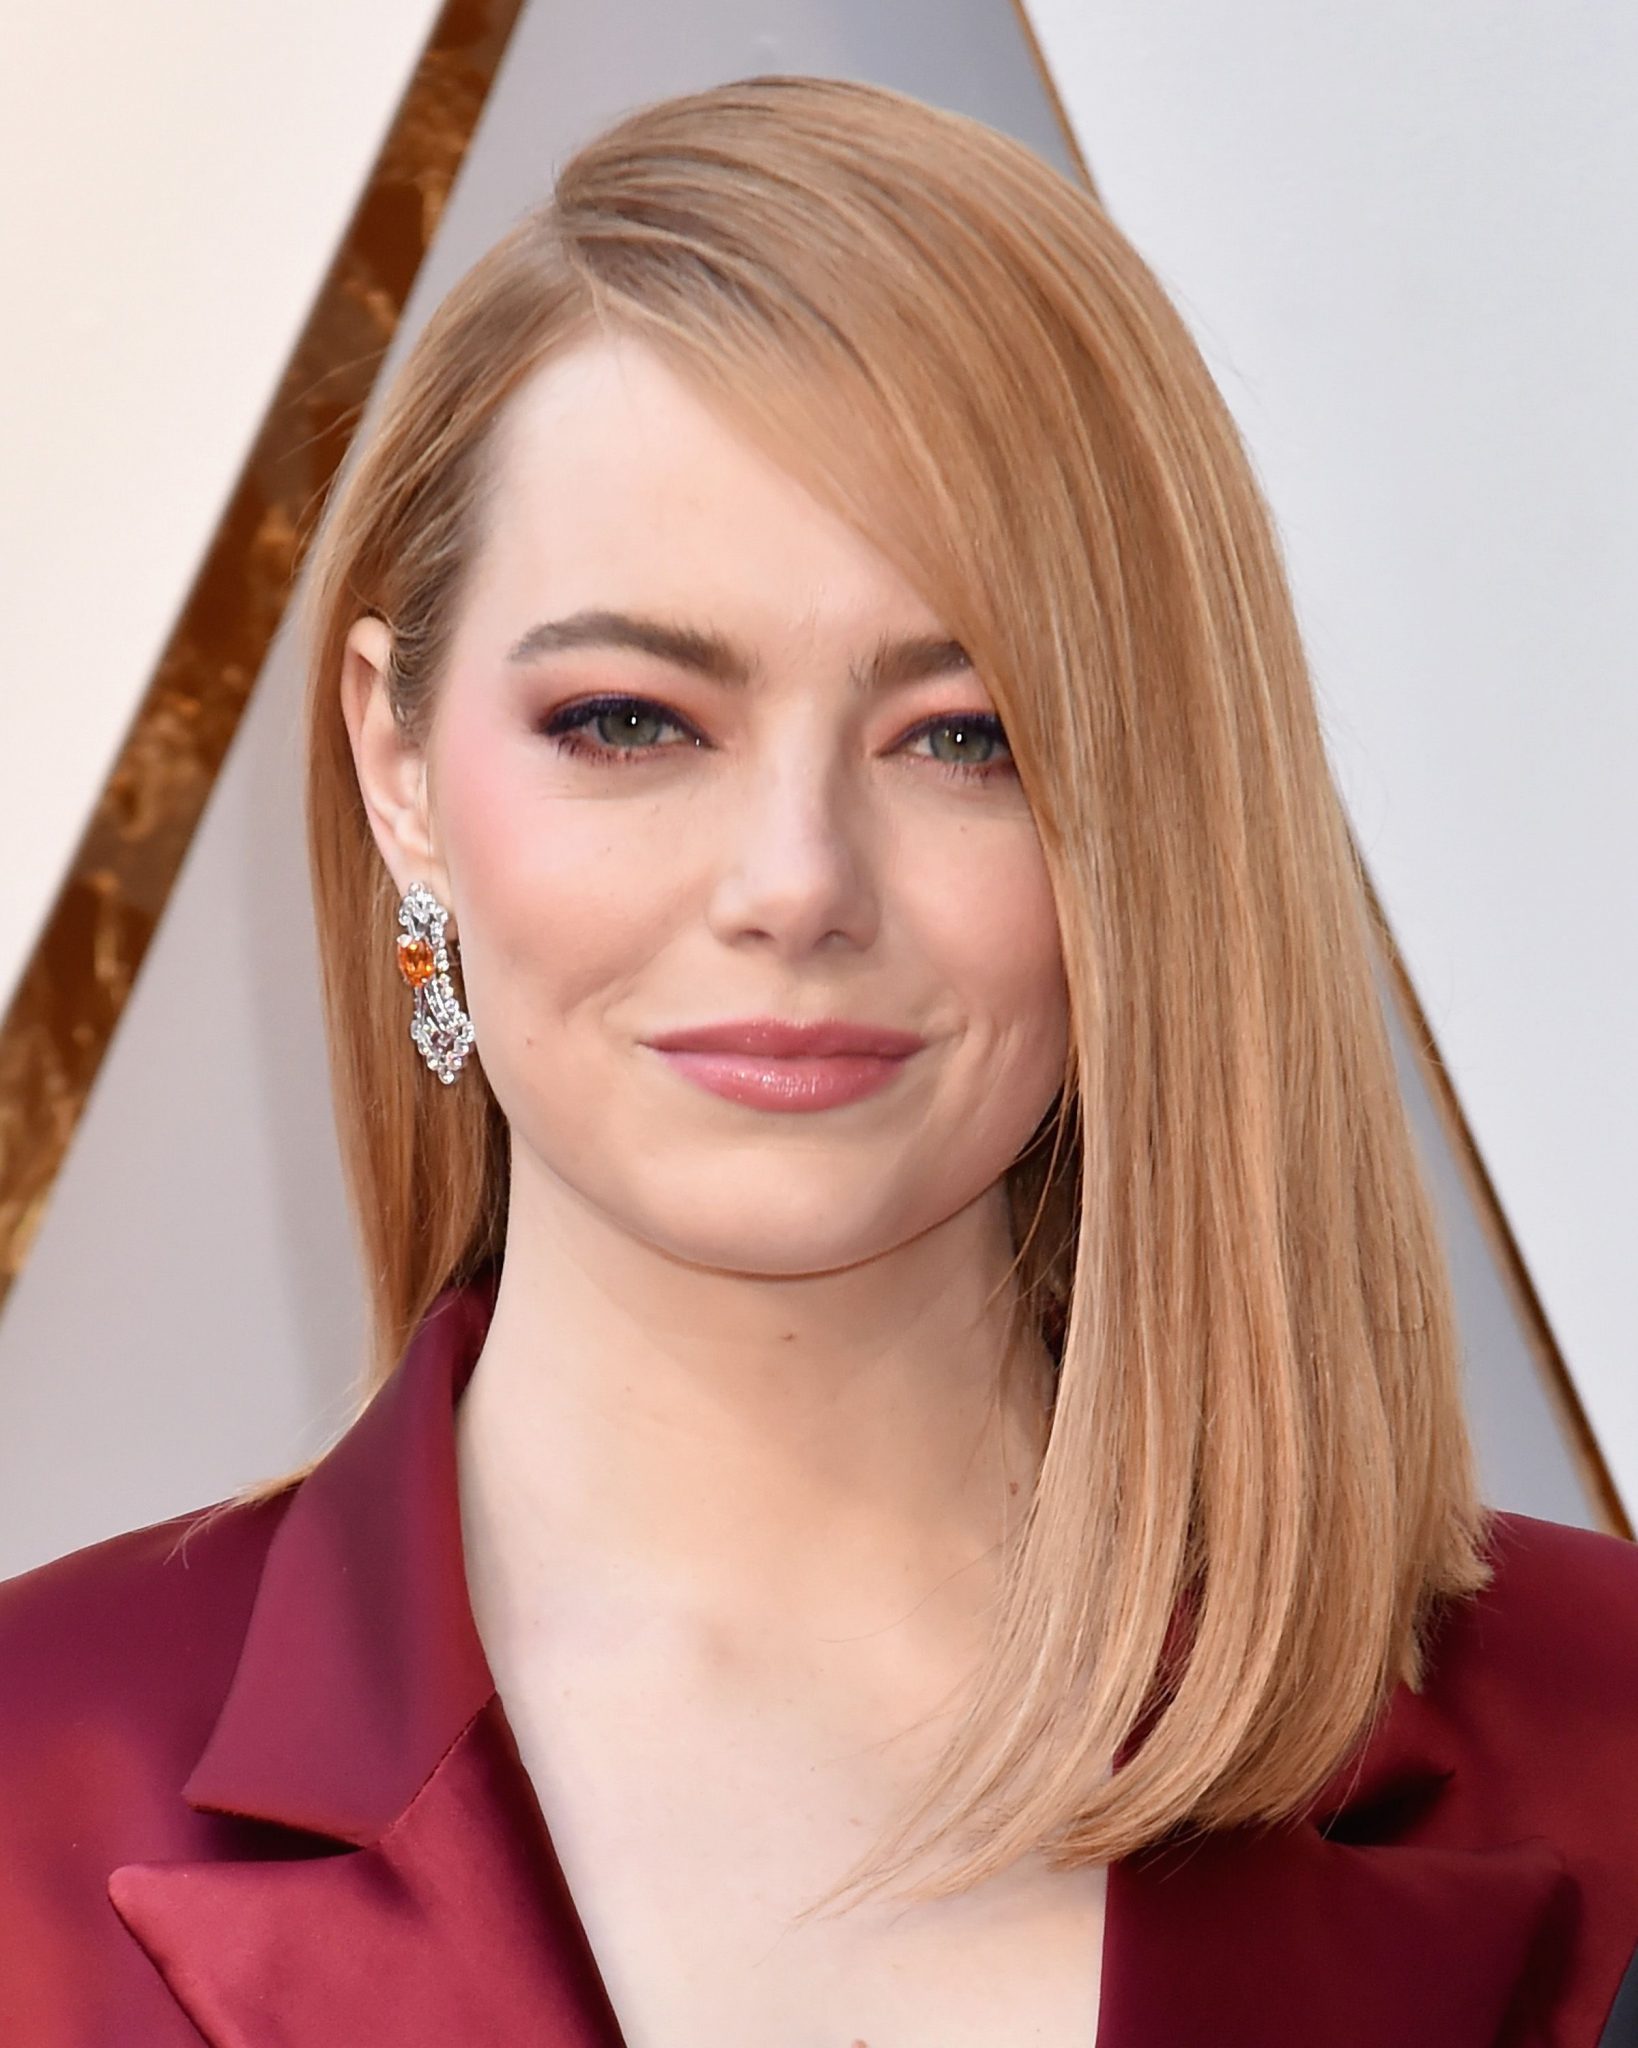 Emma stone mejores actrices del momento